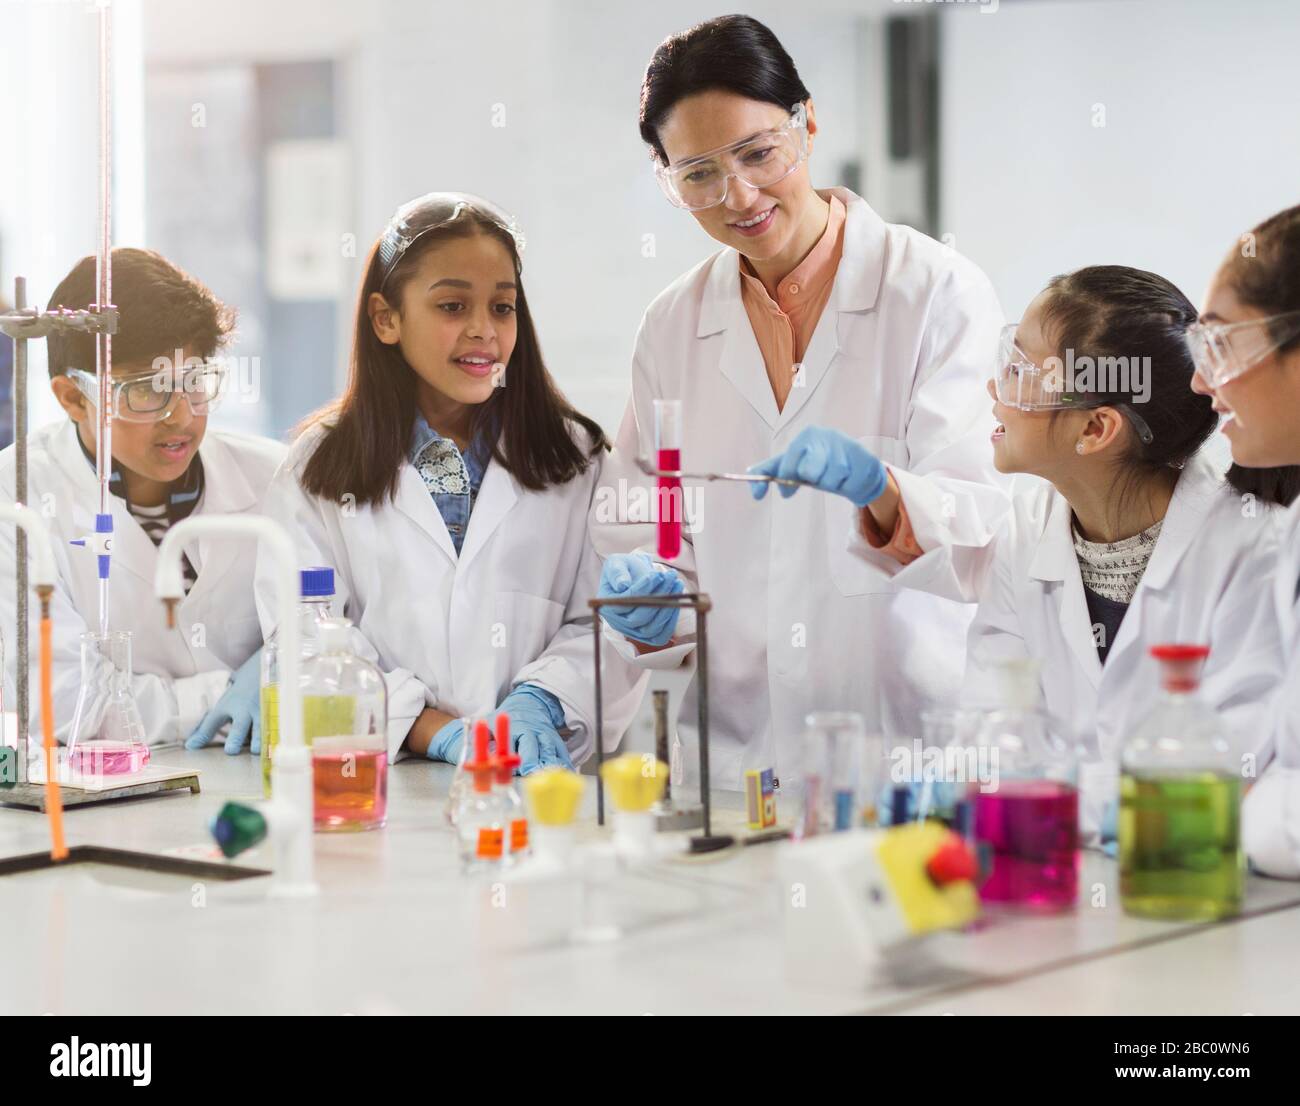 Female teacher and students conducting scientific experiment in laboratory classroom Stock Photo